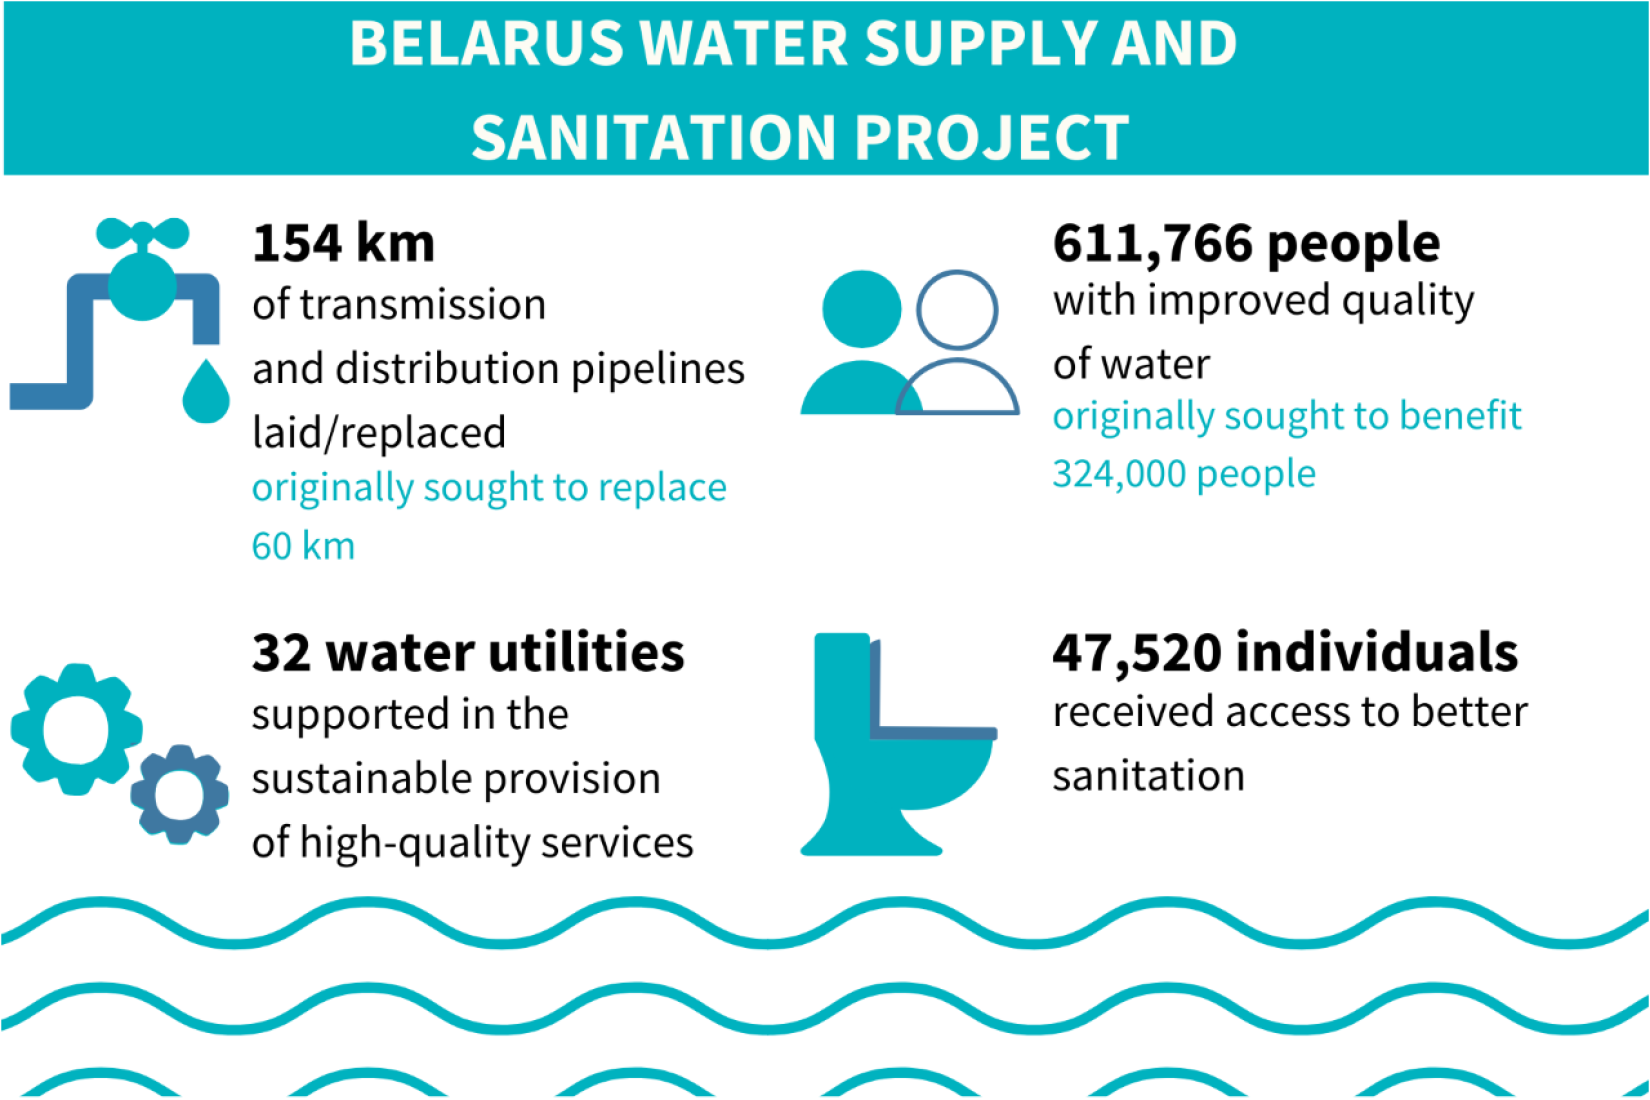 World Bank’s Belarus Water Supply and Sanitation Project 